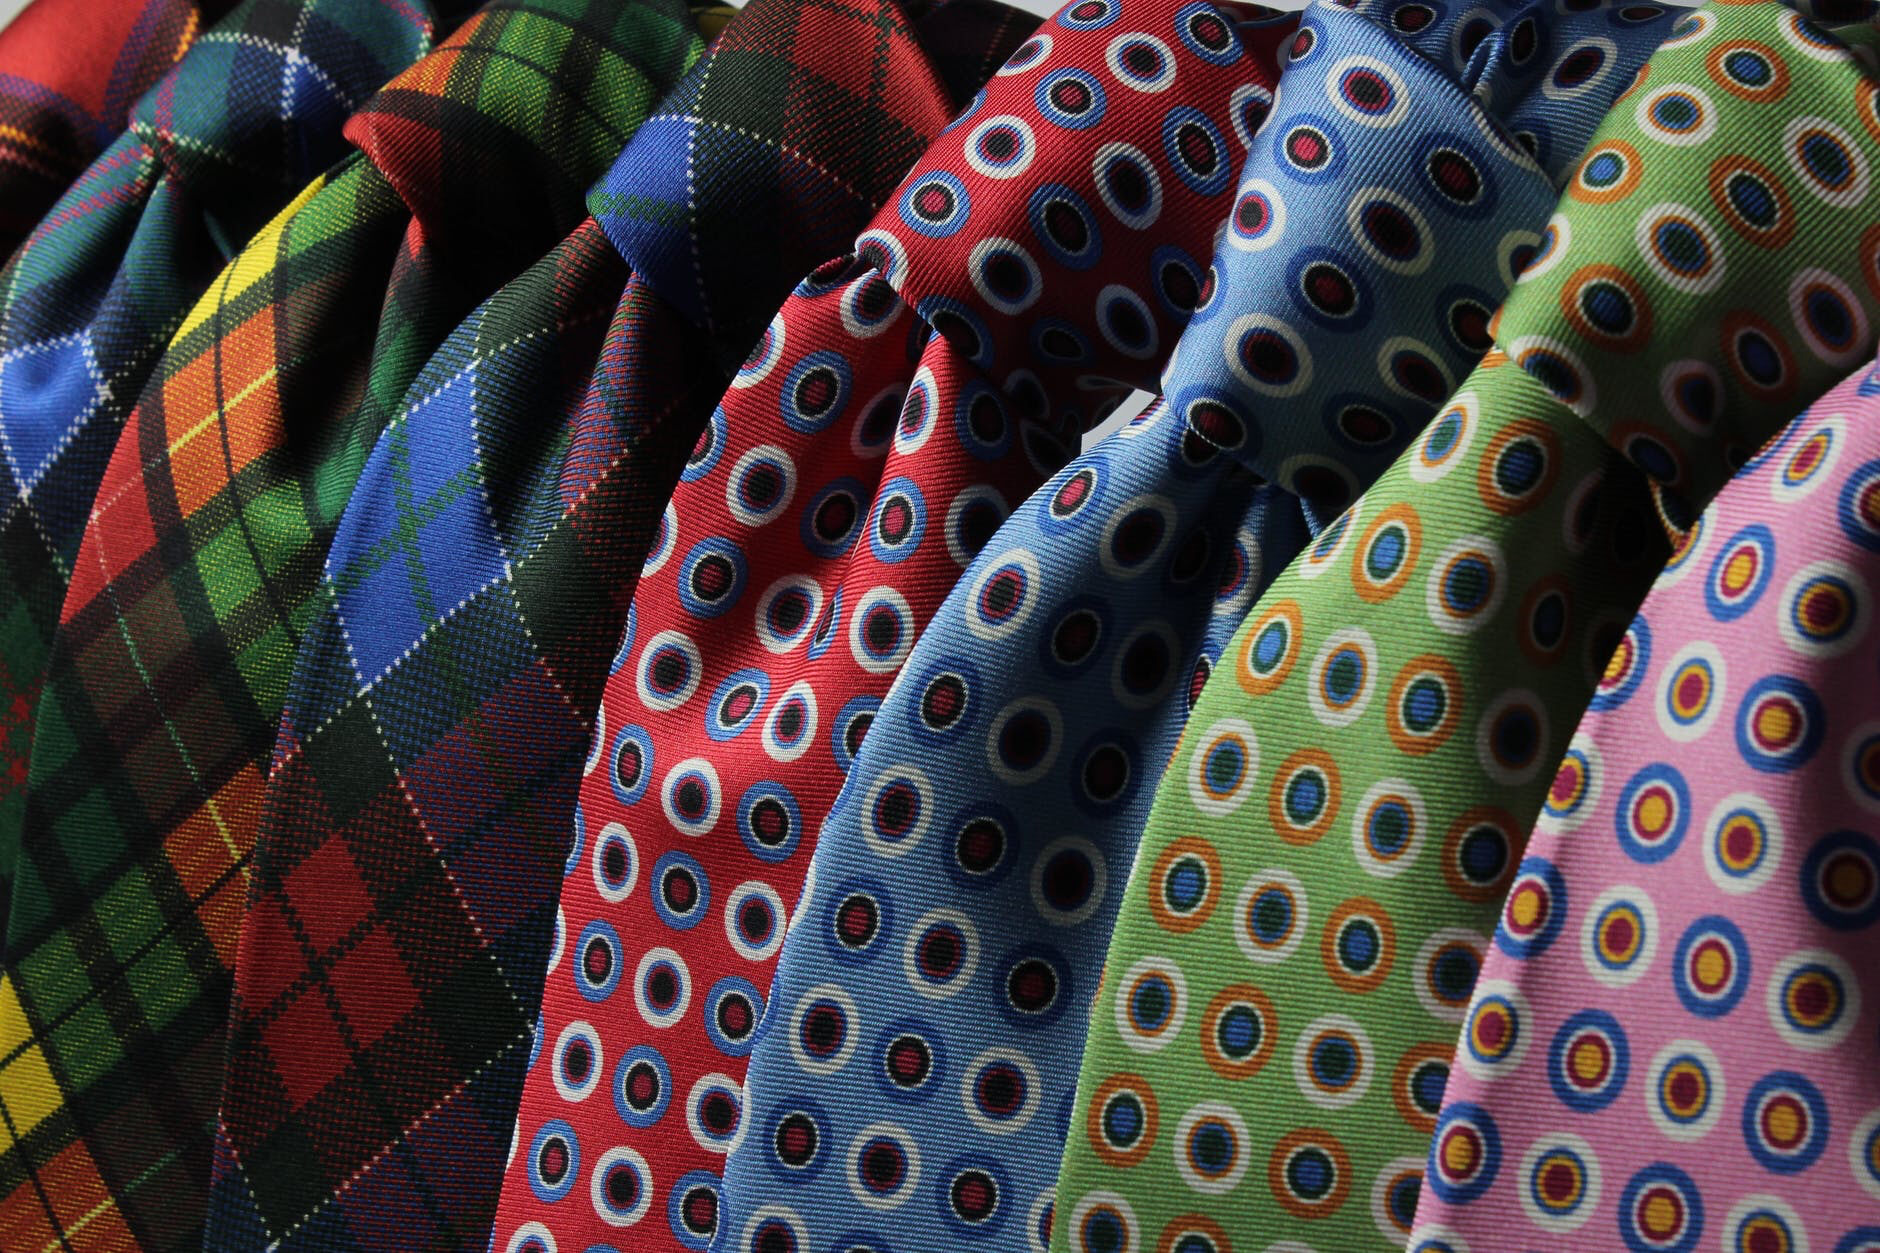 The necktie got its name 300 years ago, but fashion experts and historians say that ties have been in existence for thousands of years.